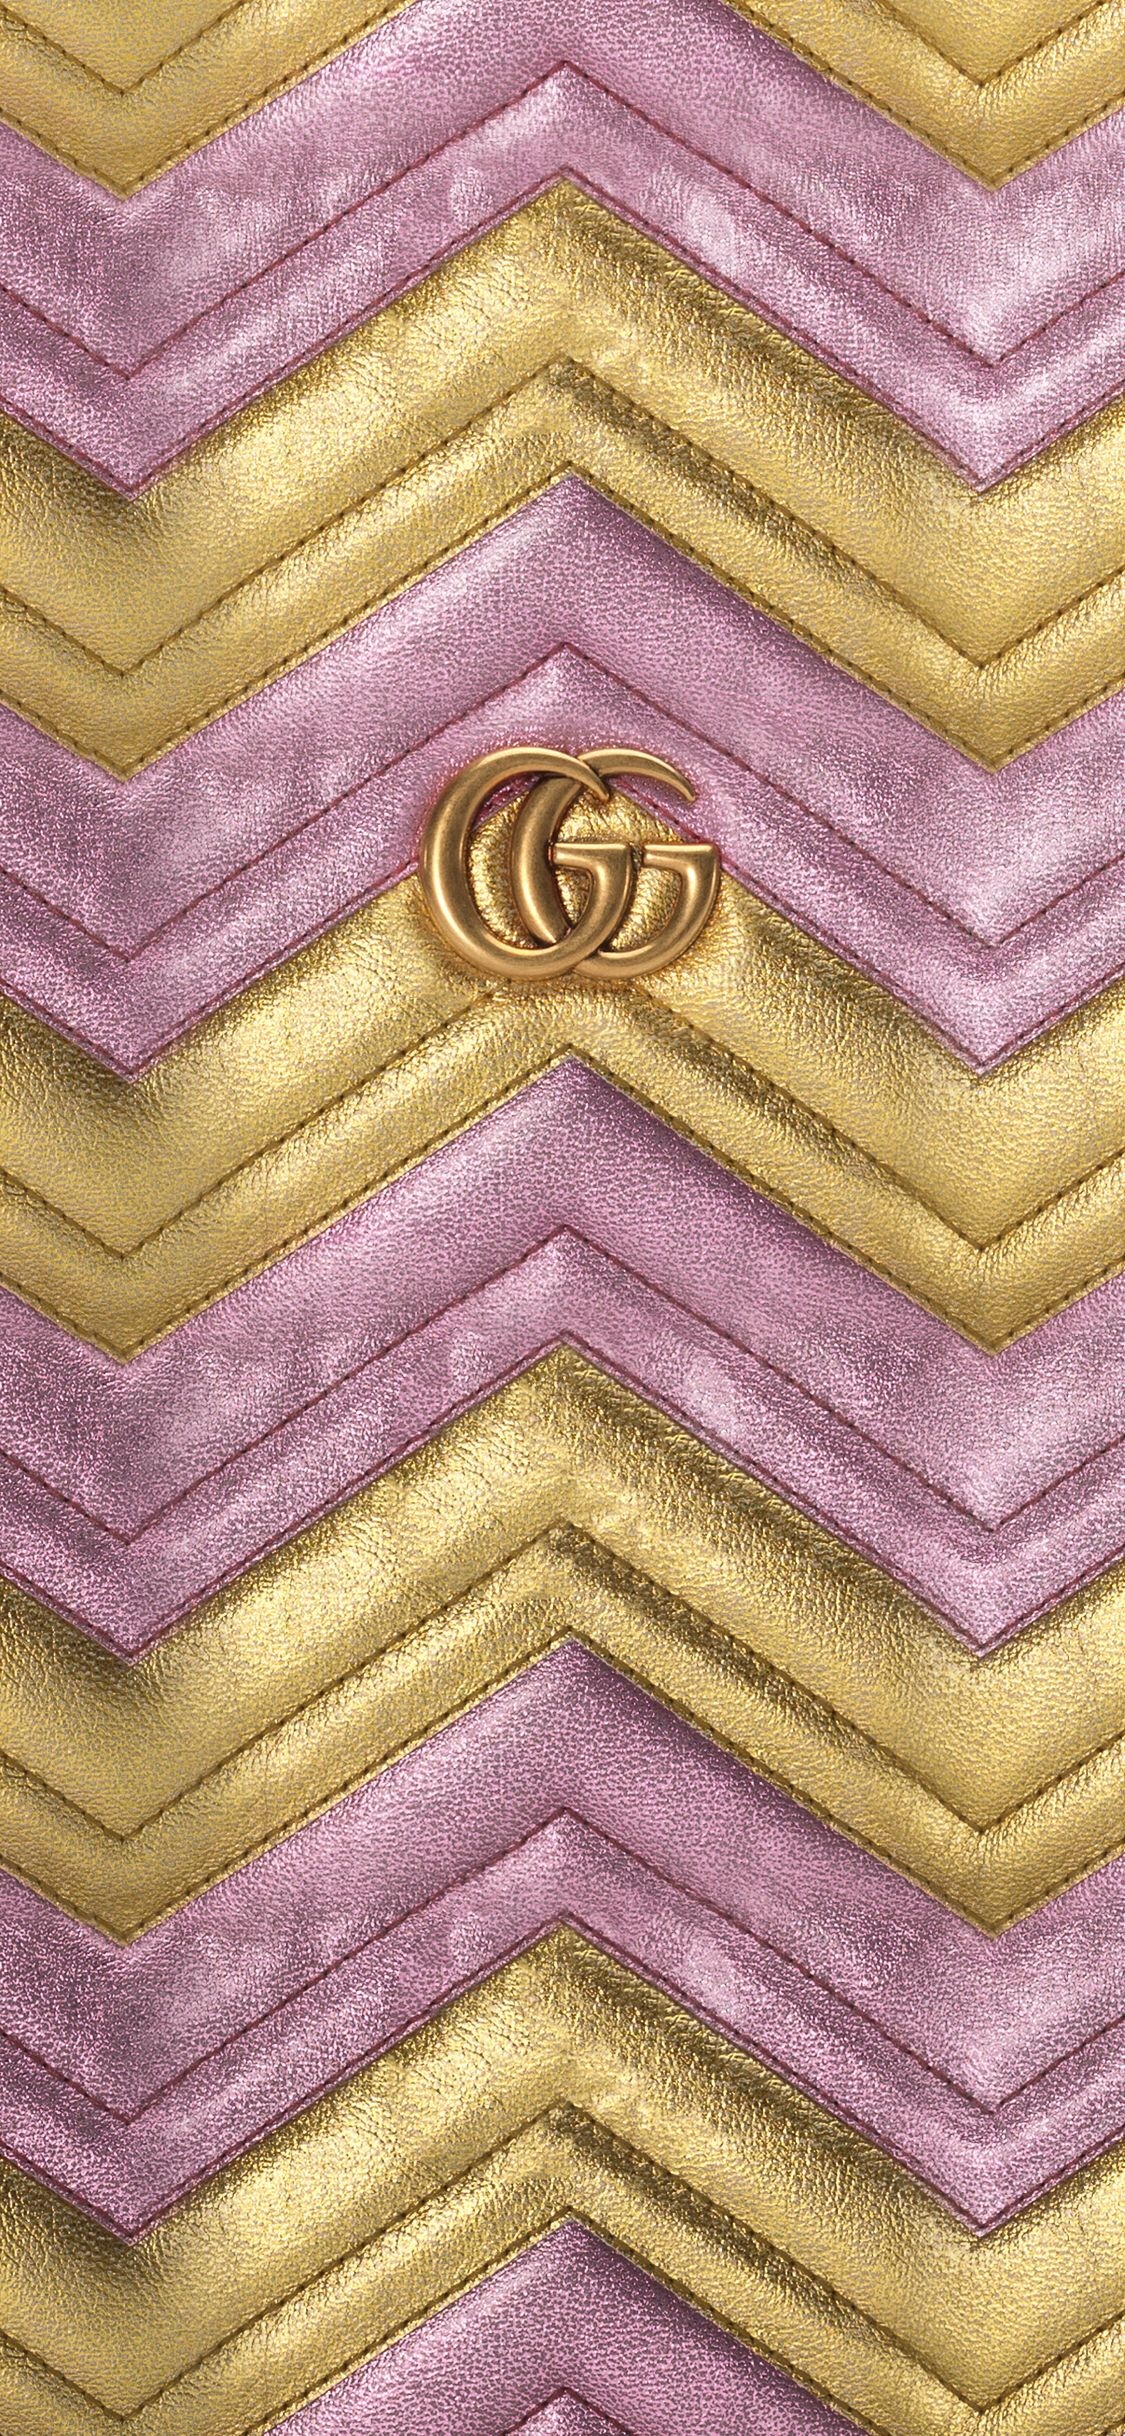 Gucci: An Italian fashion label founded in 1921, Leather. 1130x2440 HD Background.